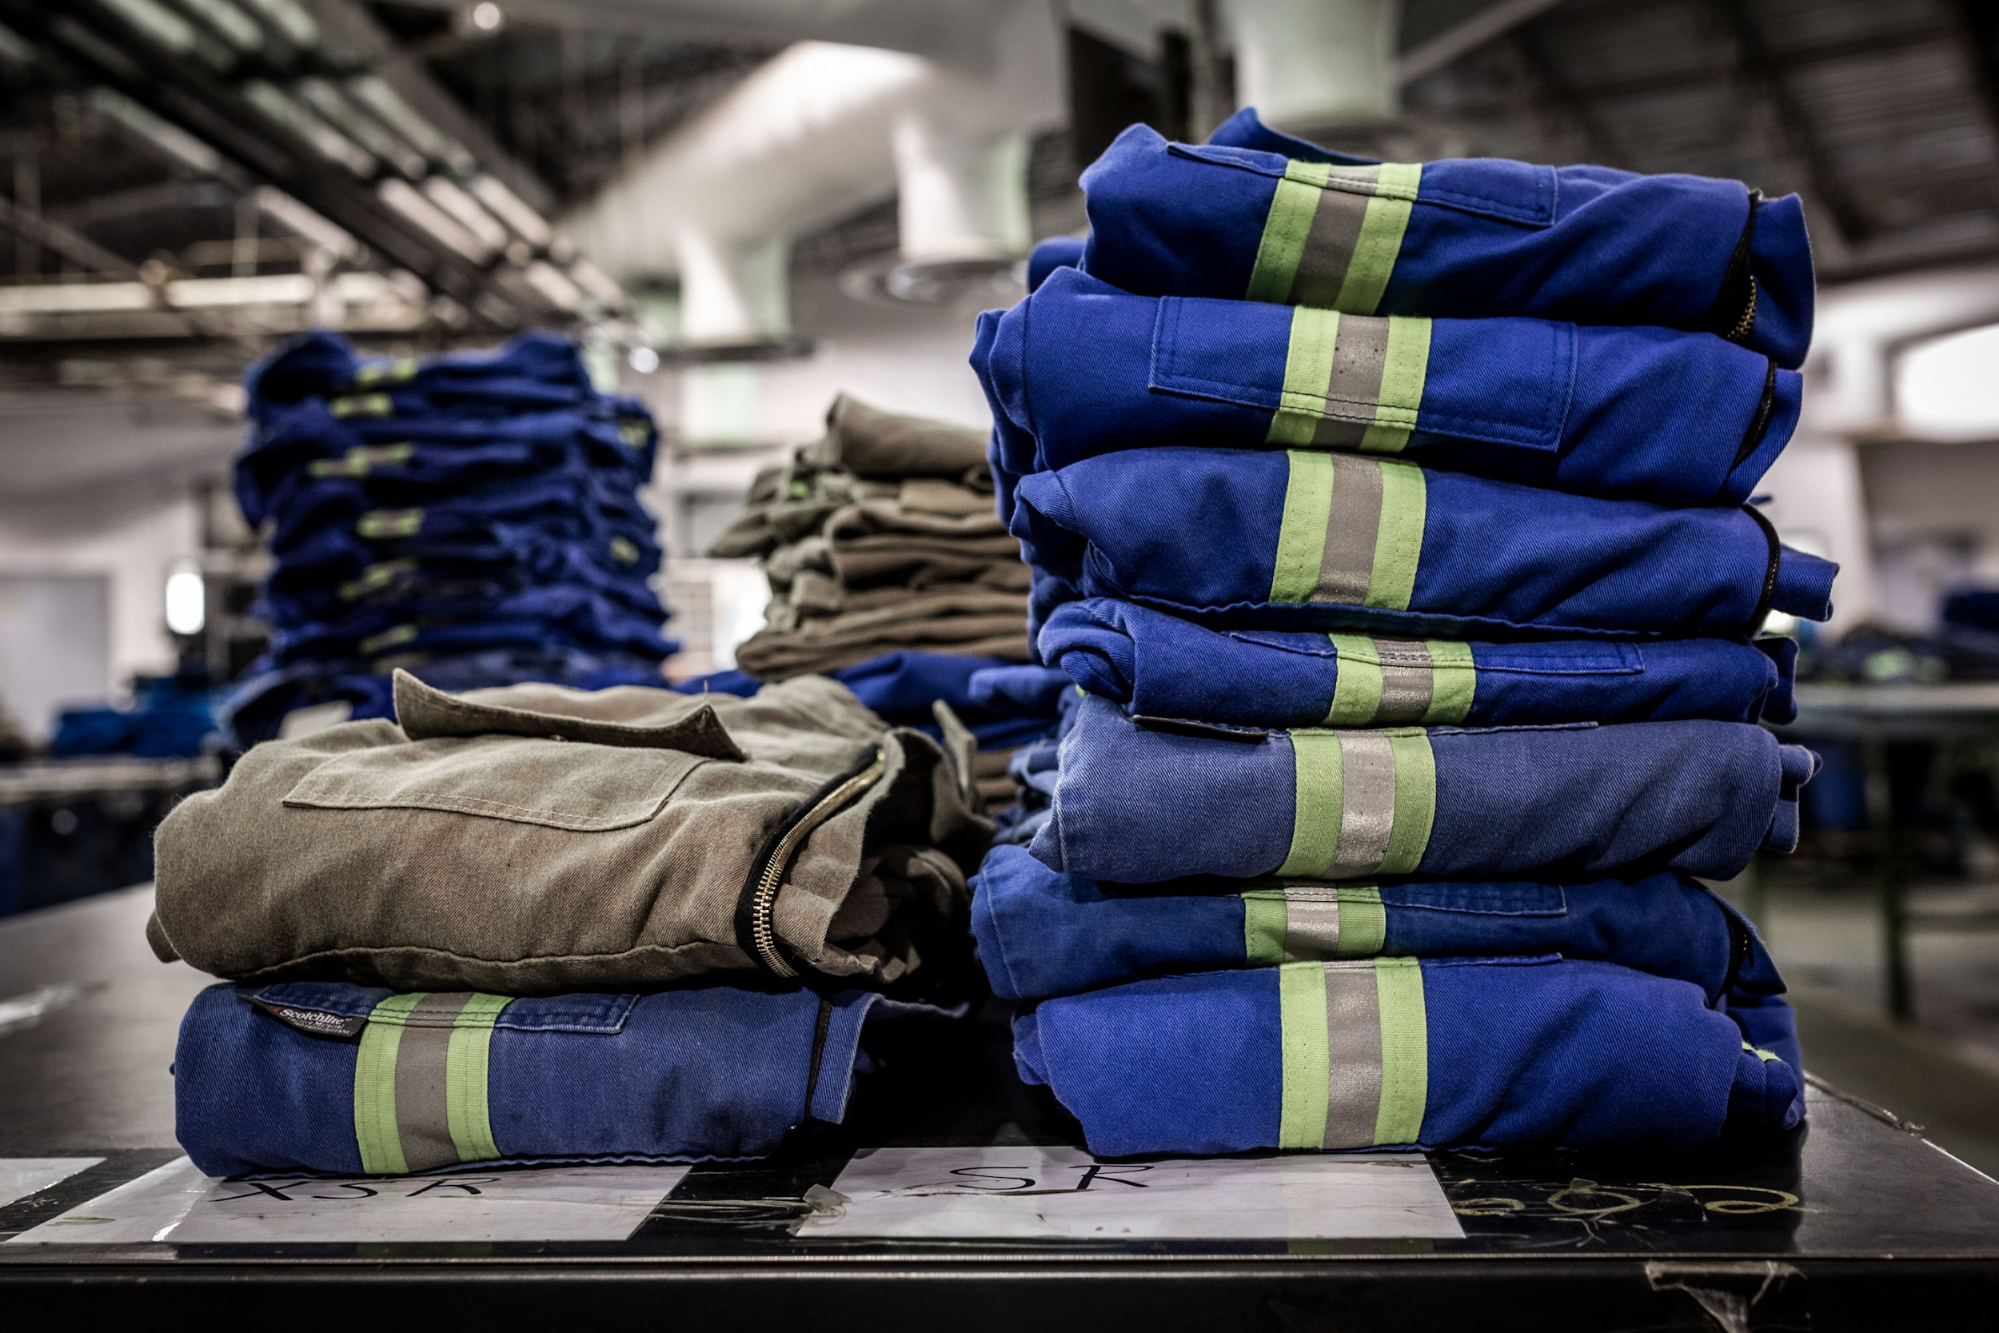 Top 5 Laundering Tips for Workwear